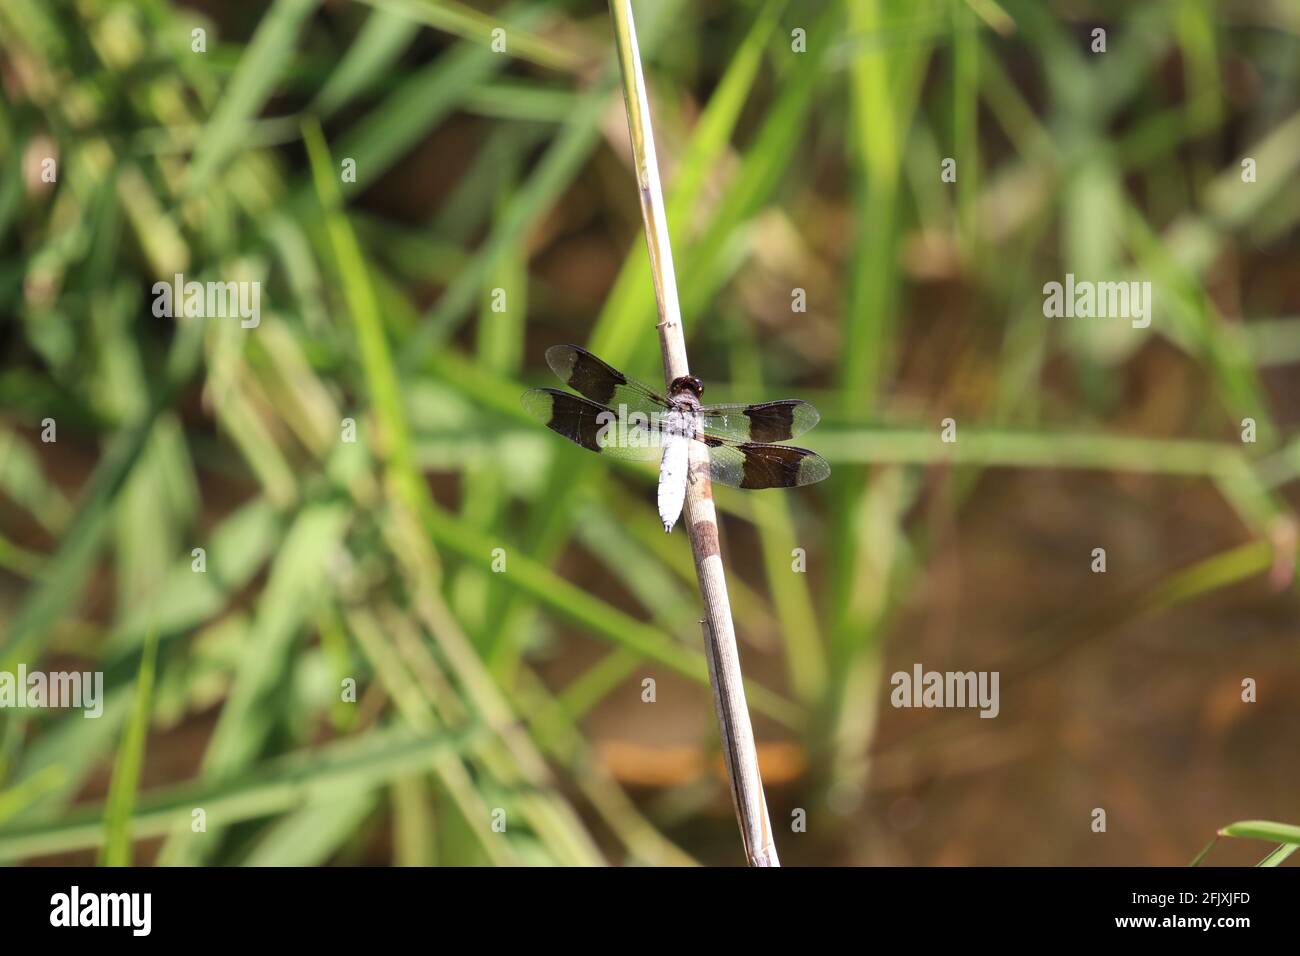 Dragonfly with black stripes on wings perched on twig Stock Photo